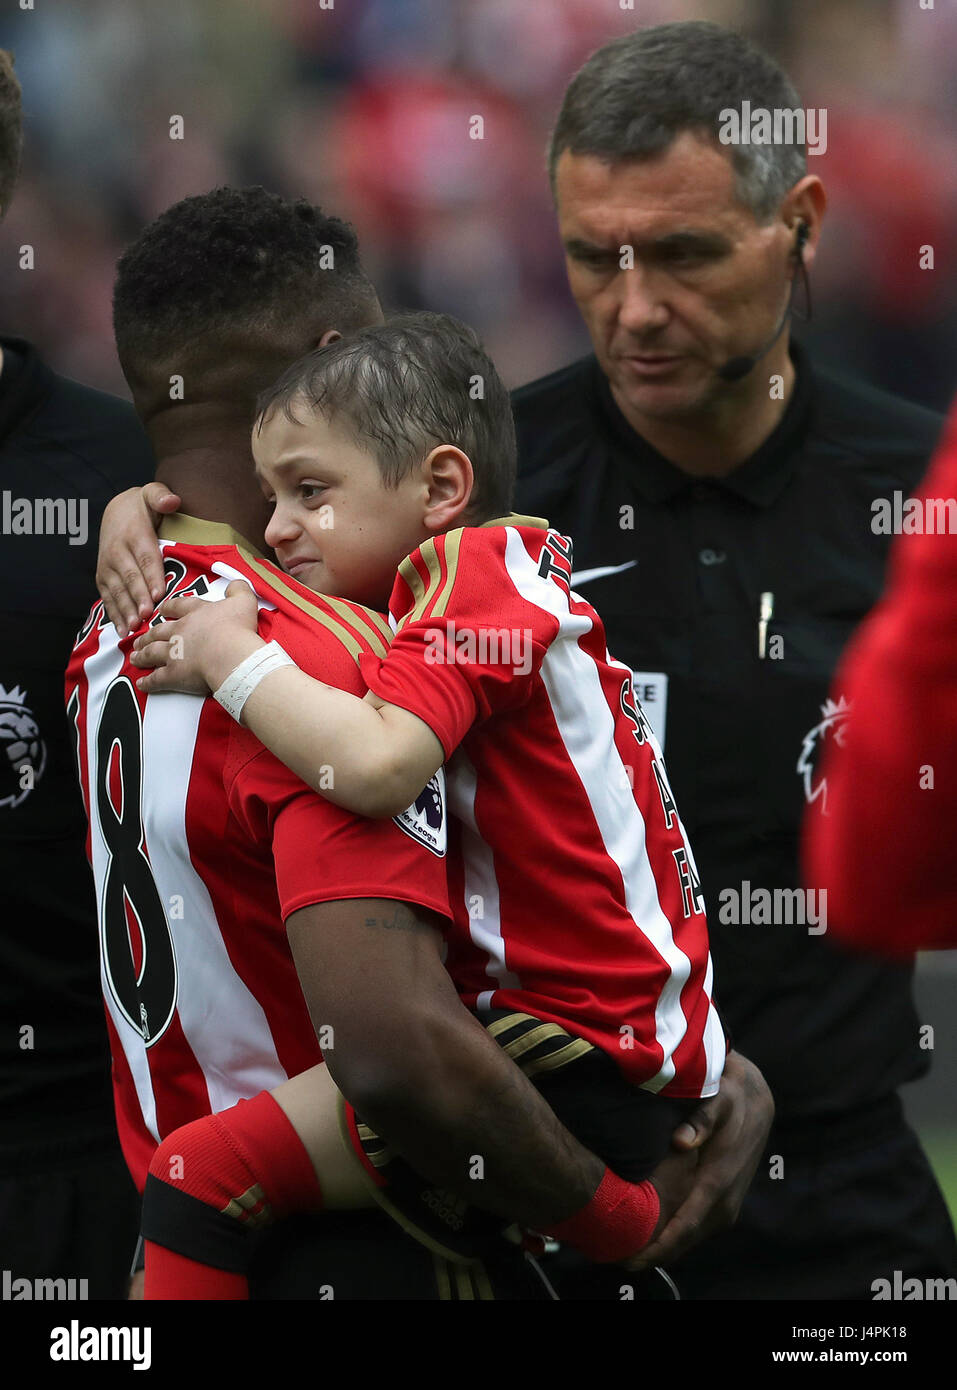 Sunderland's Jermain Defoe and mascot Bradley Lowery during the Premier League match at the Stadium of Light, Sunderland. PRESS ASSOCIATION Photo. Picture date: Saturday May 13, 2017. See PA story SOCCER Sunderland. Photo credit should read: Owen Humphreys/PA Wire. RESTRICTIONS: No use with unauthorised audio, video, data, fixture lists, club/league logos or 'live' services. Online in-match use limited to 75 images, no video emulation. No use in betting, games or single club/league/player publications Stock Photo